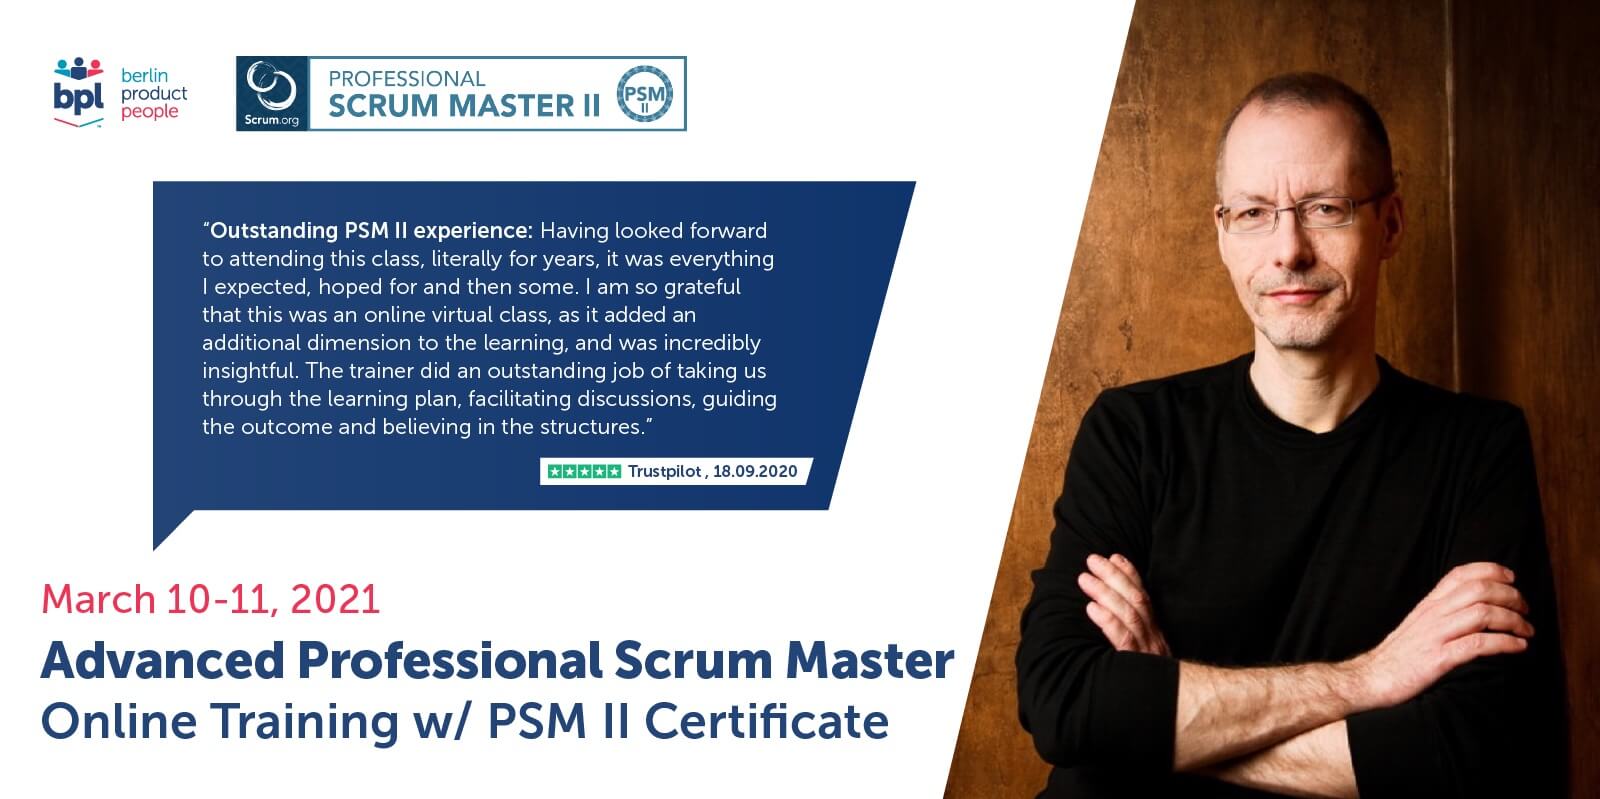 Advanced Professional Scrum Master Online Training w/ PSM II Certificate — March 10-11, 2021 — Berlin Product People GmbH